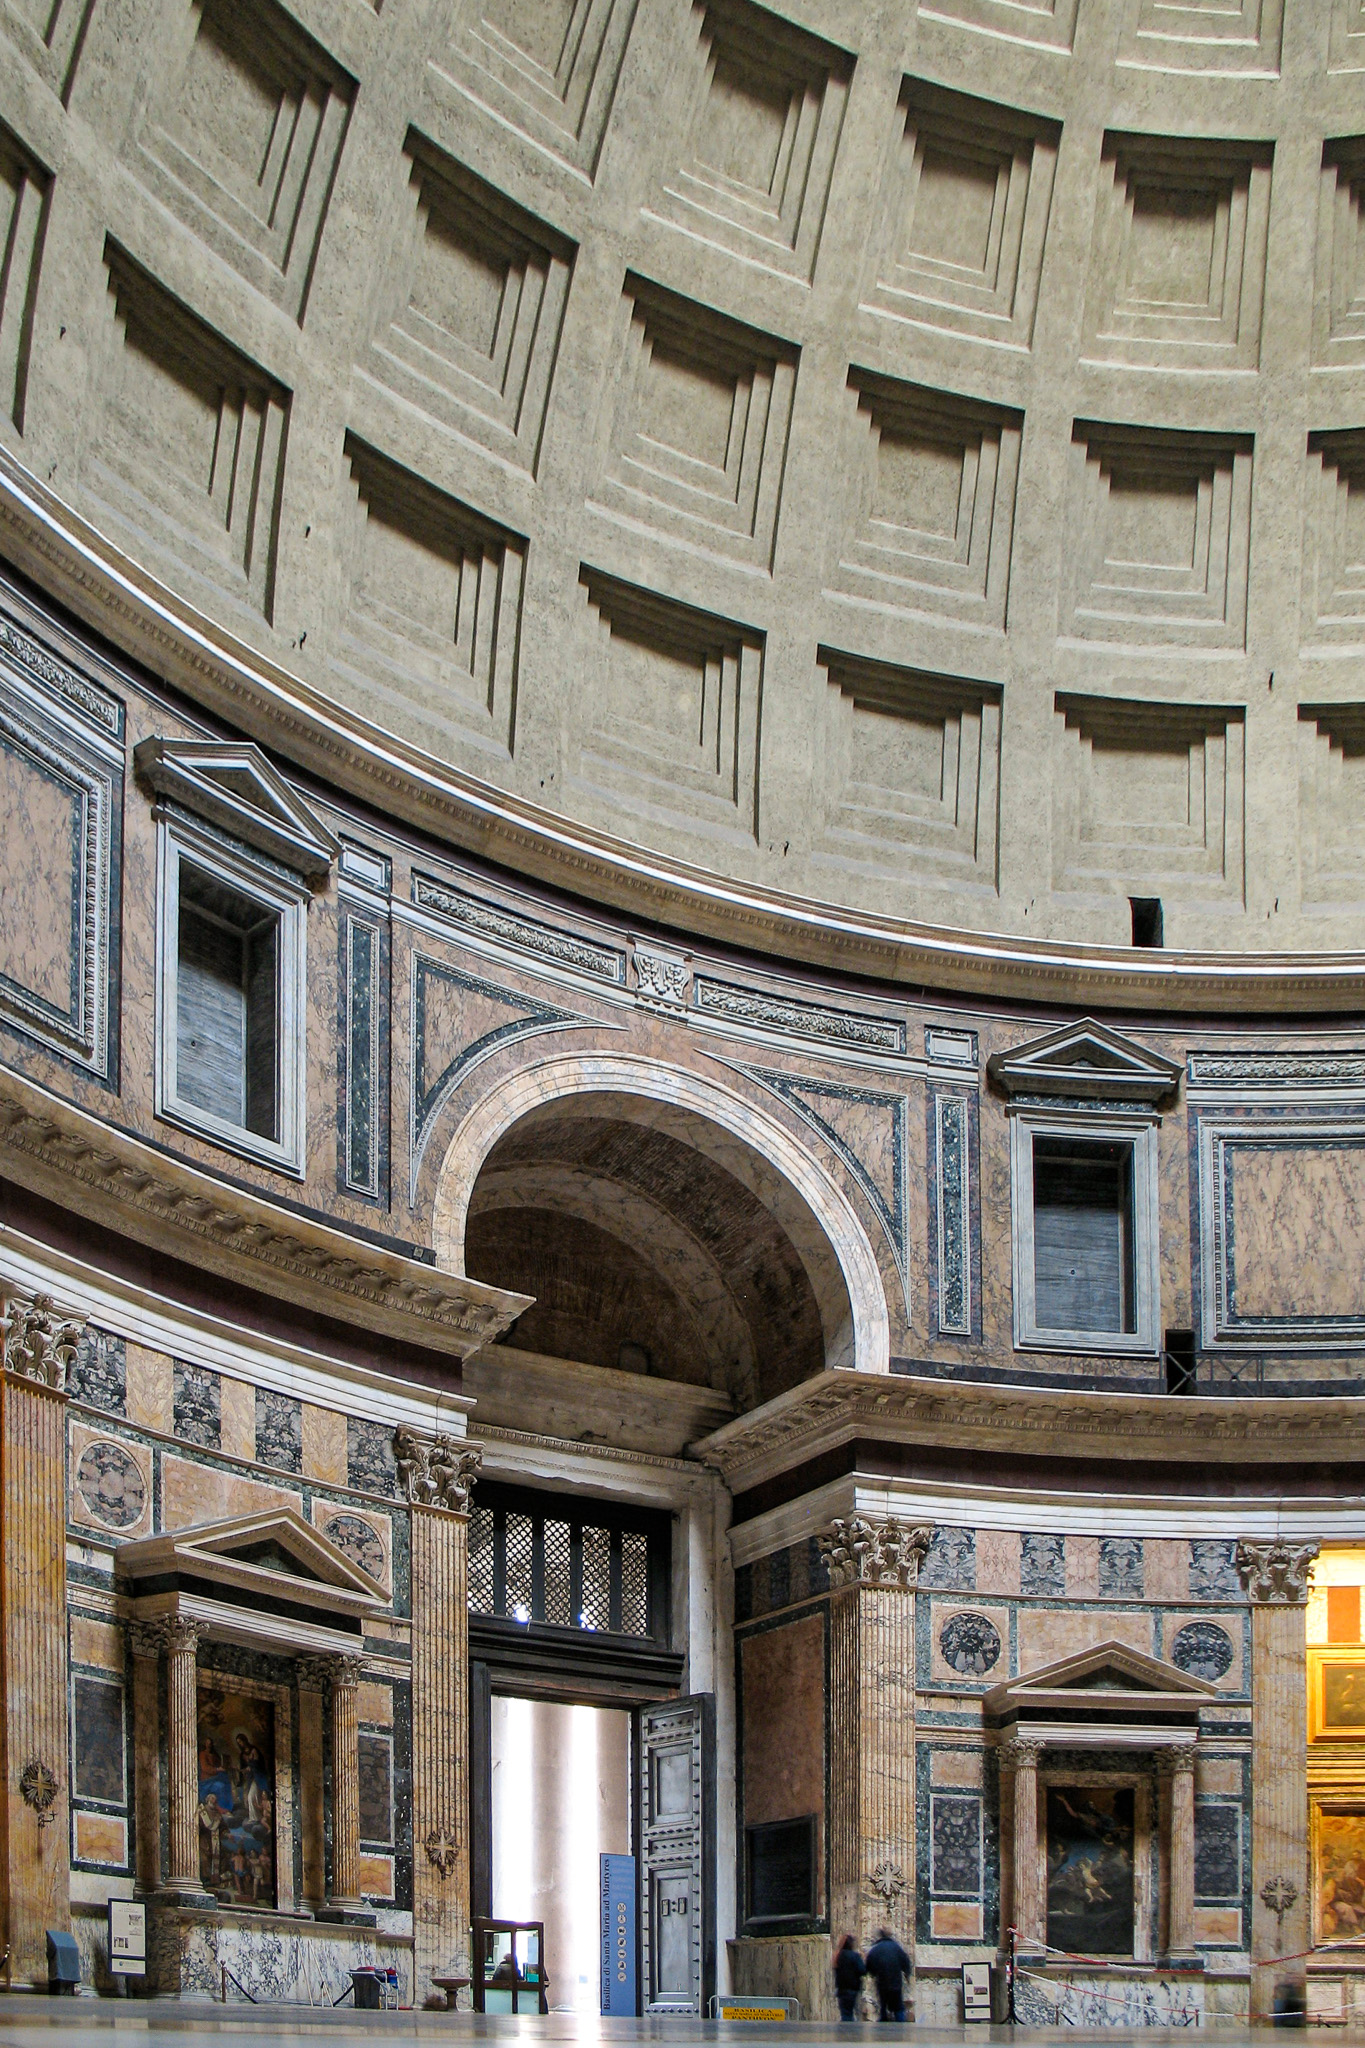 The interior of the Pantheon in Rome